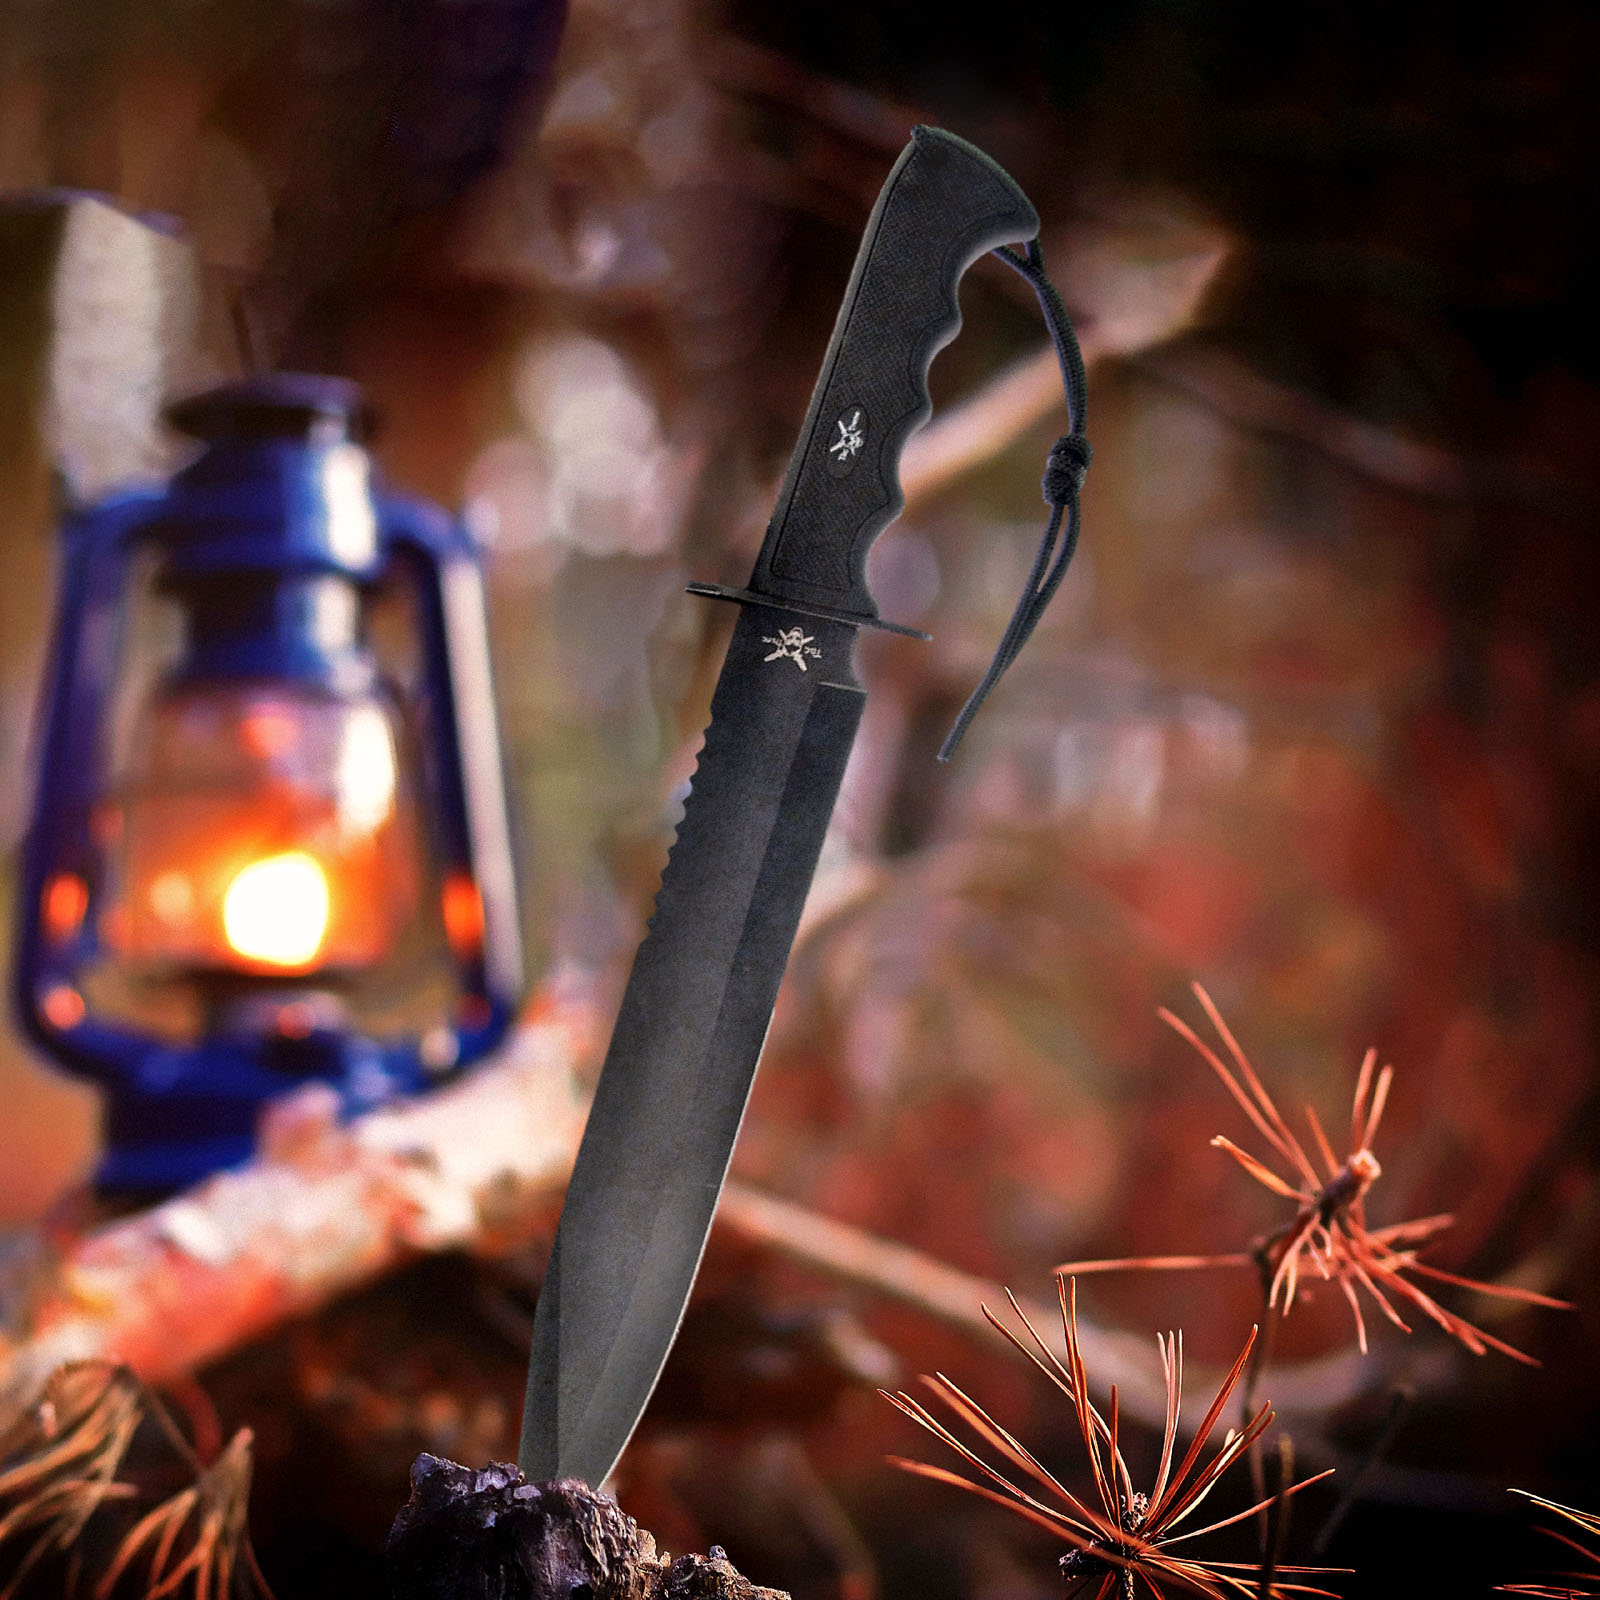 Extreme Bowie Survival Knife